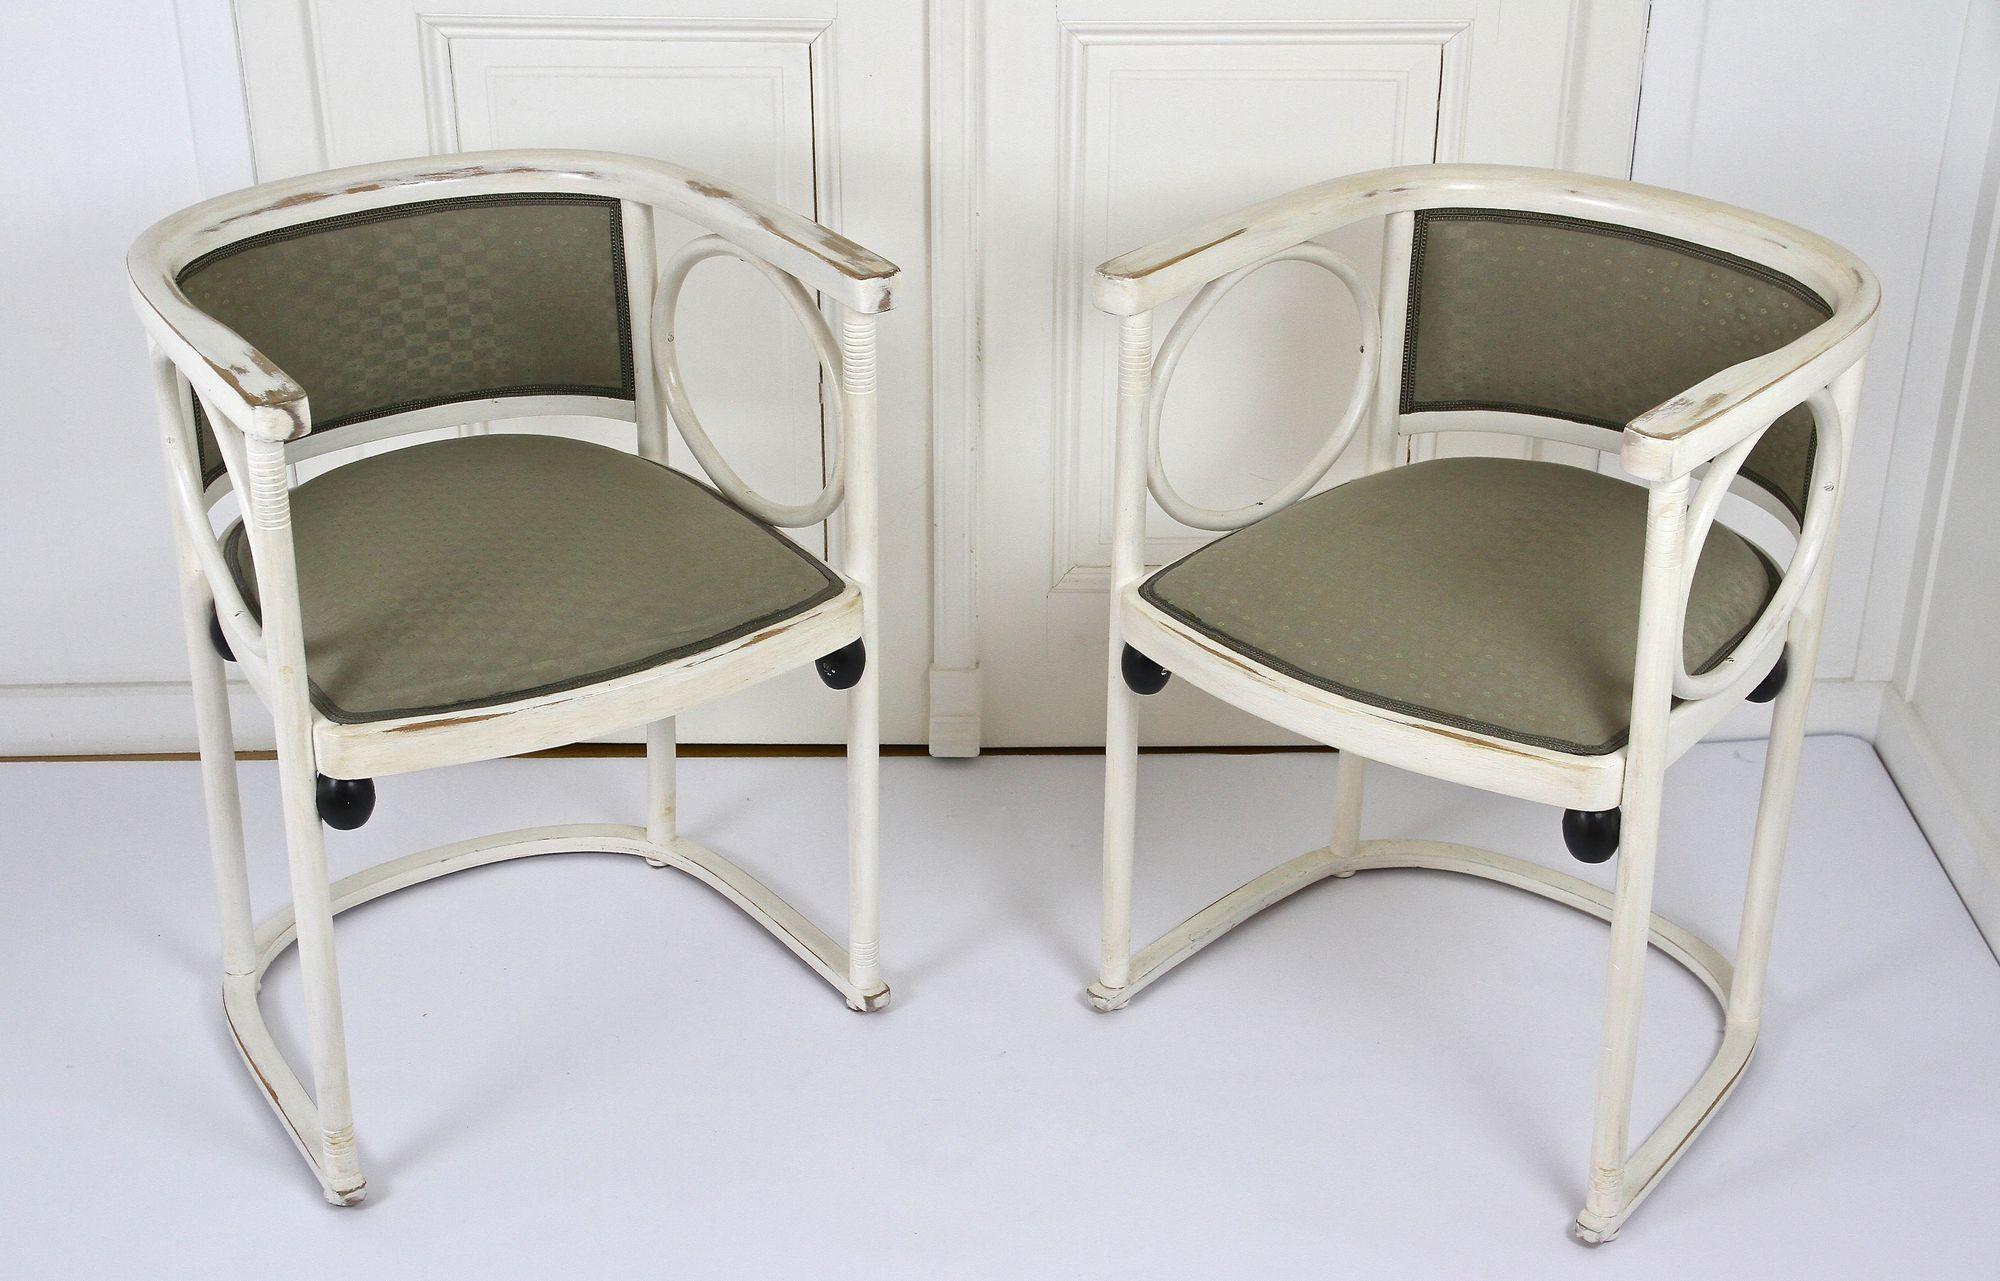 Art Nouveau Thonet Armchairs by Josef Hoffmann, White Lacquered, AT ca. 1905 For Sale 3